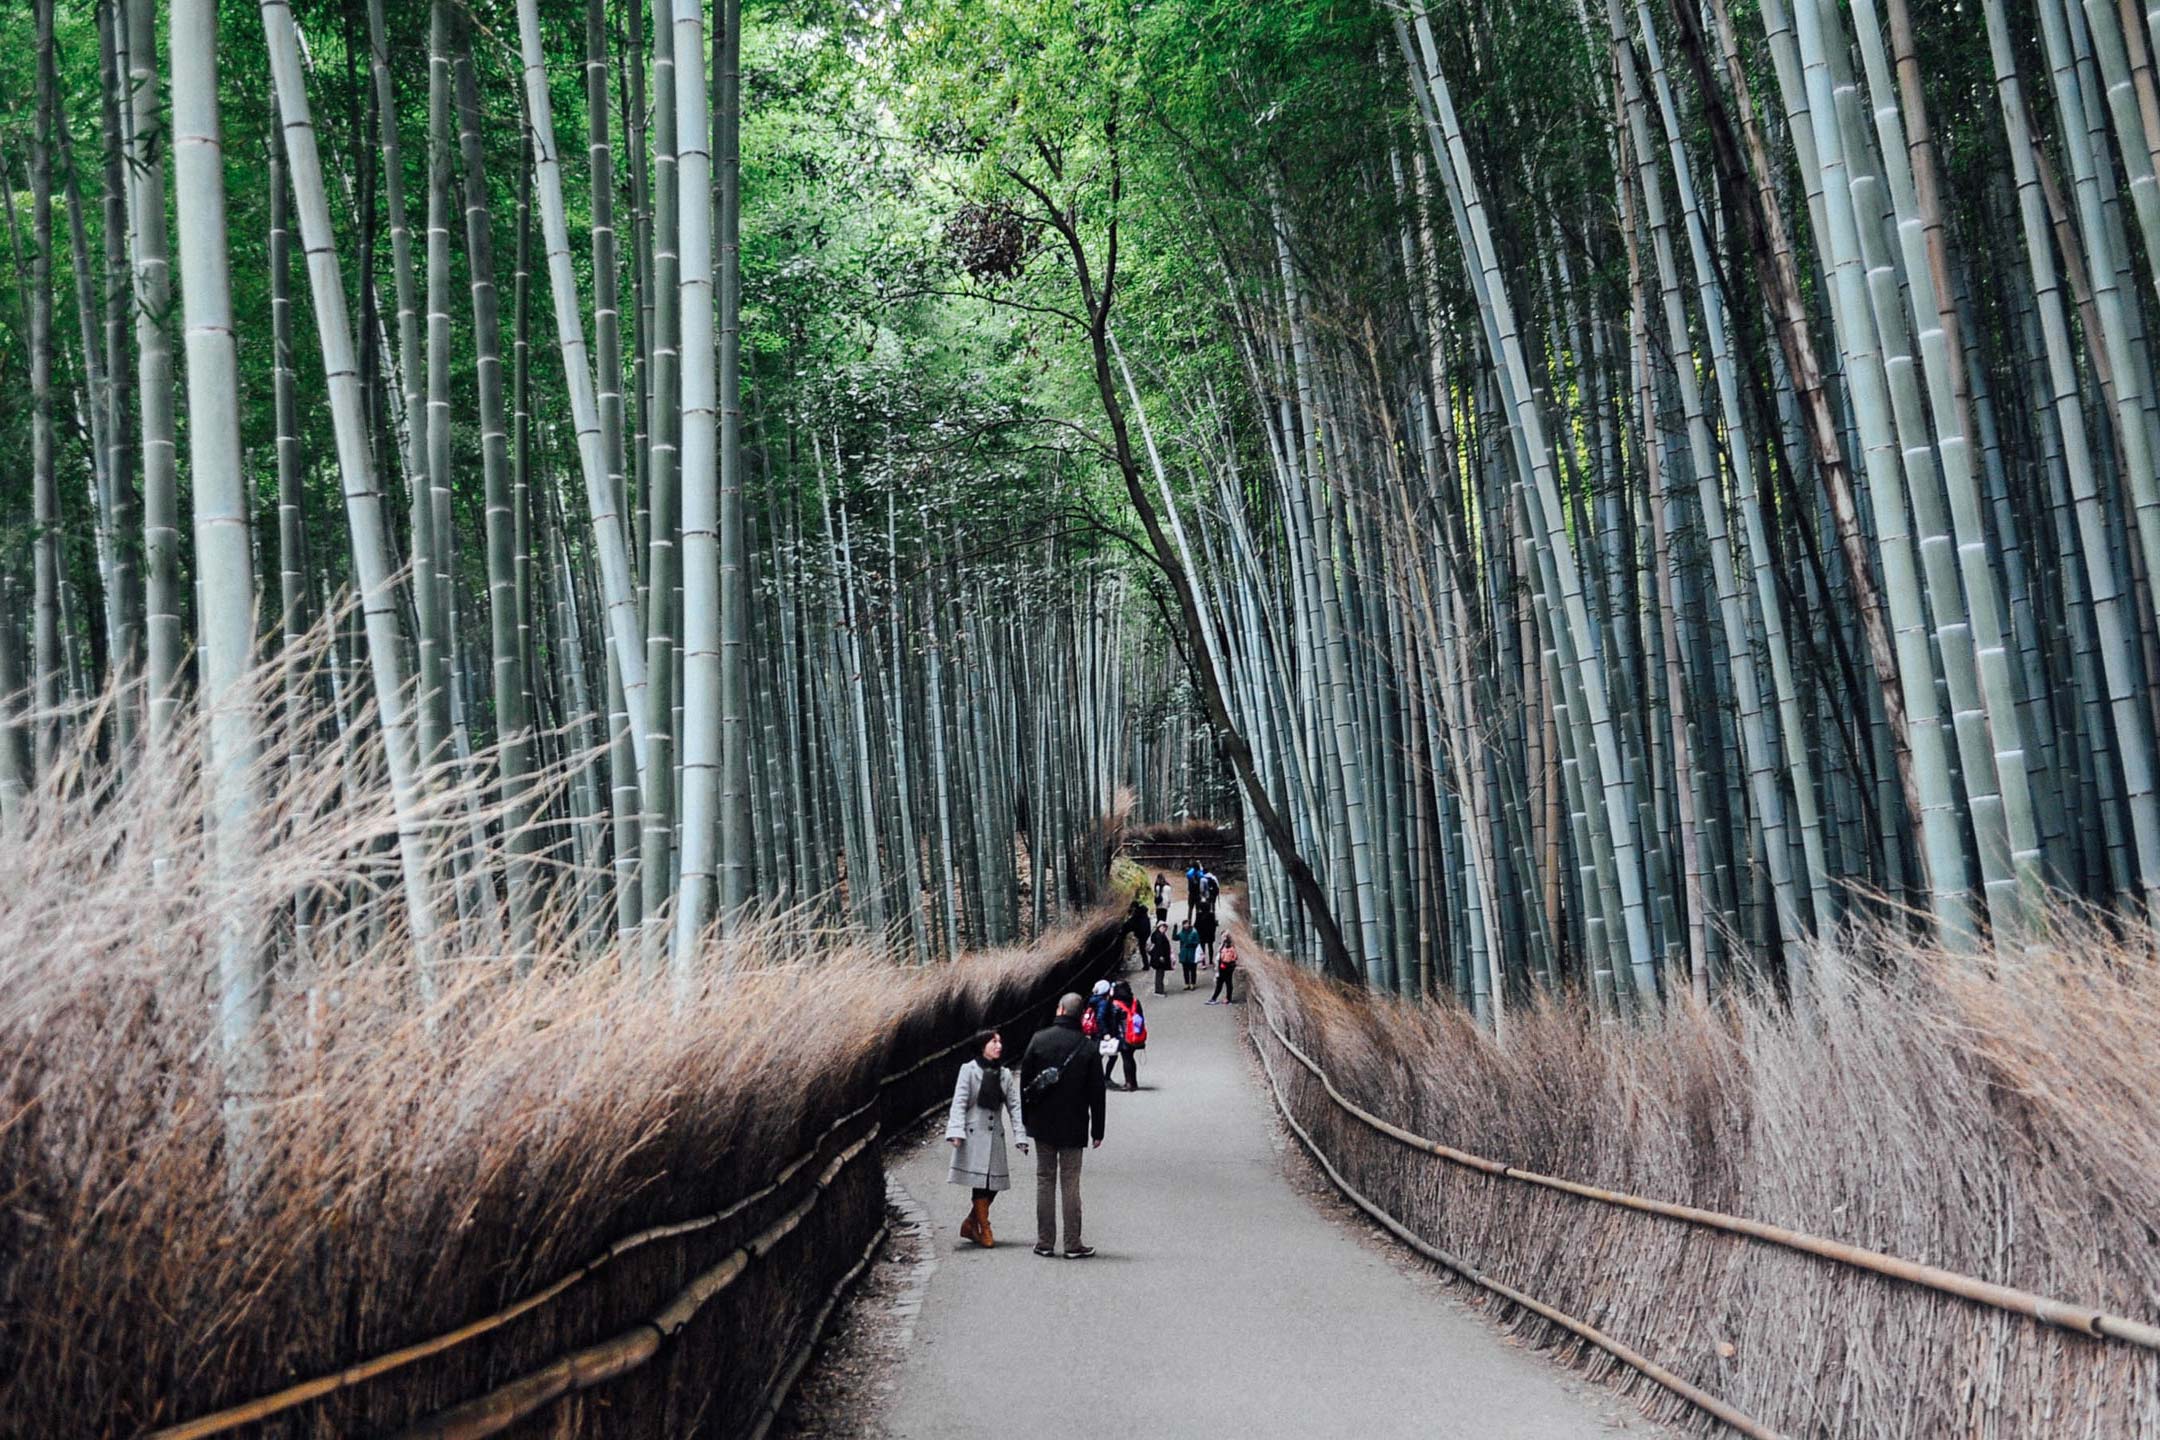 People on a path in bamboo forest